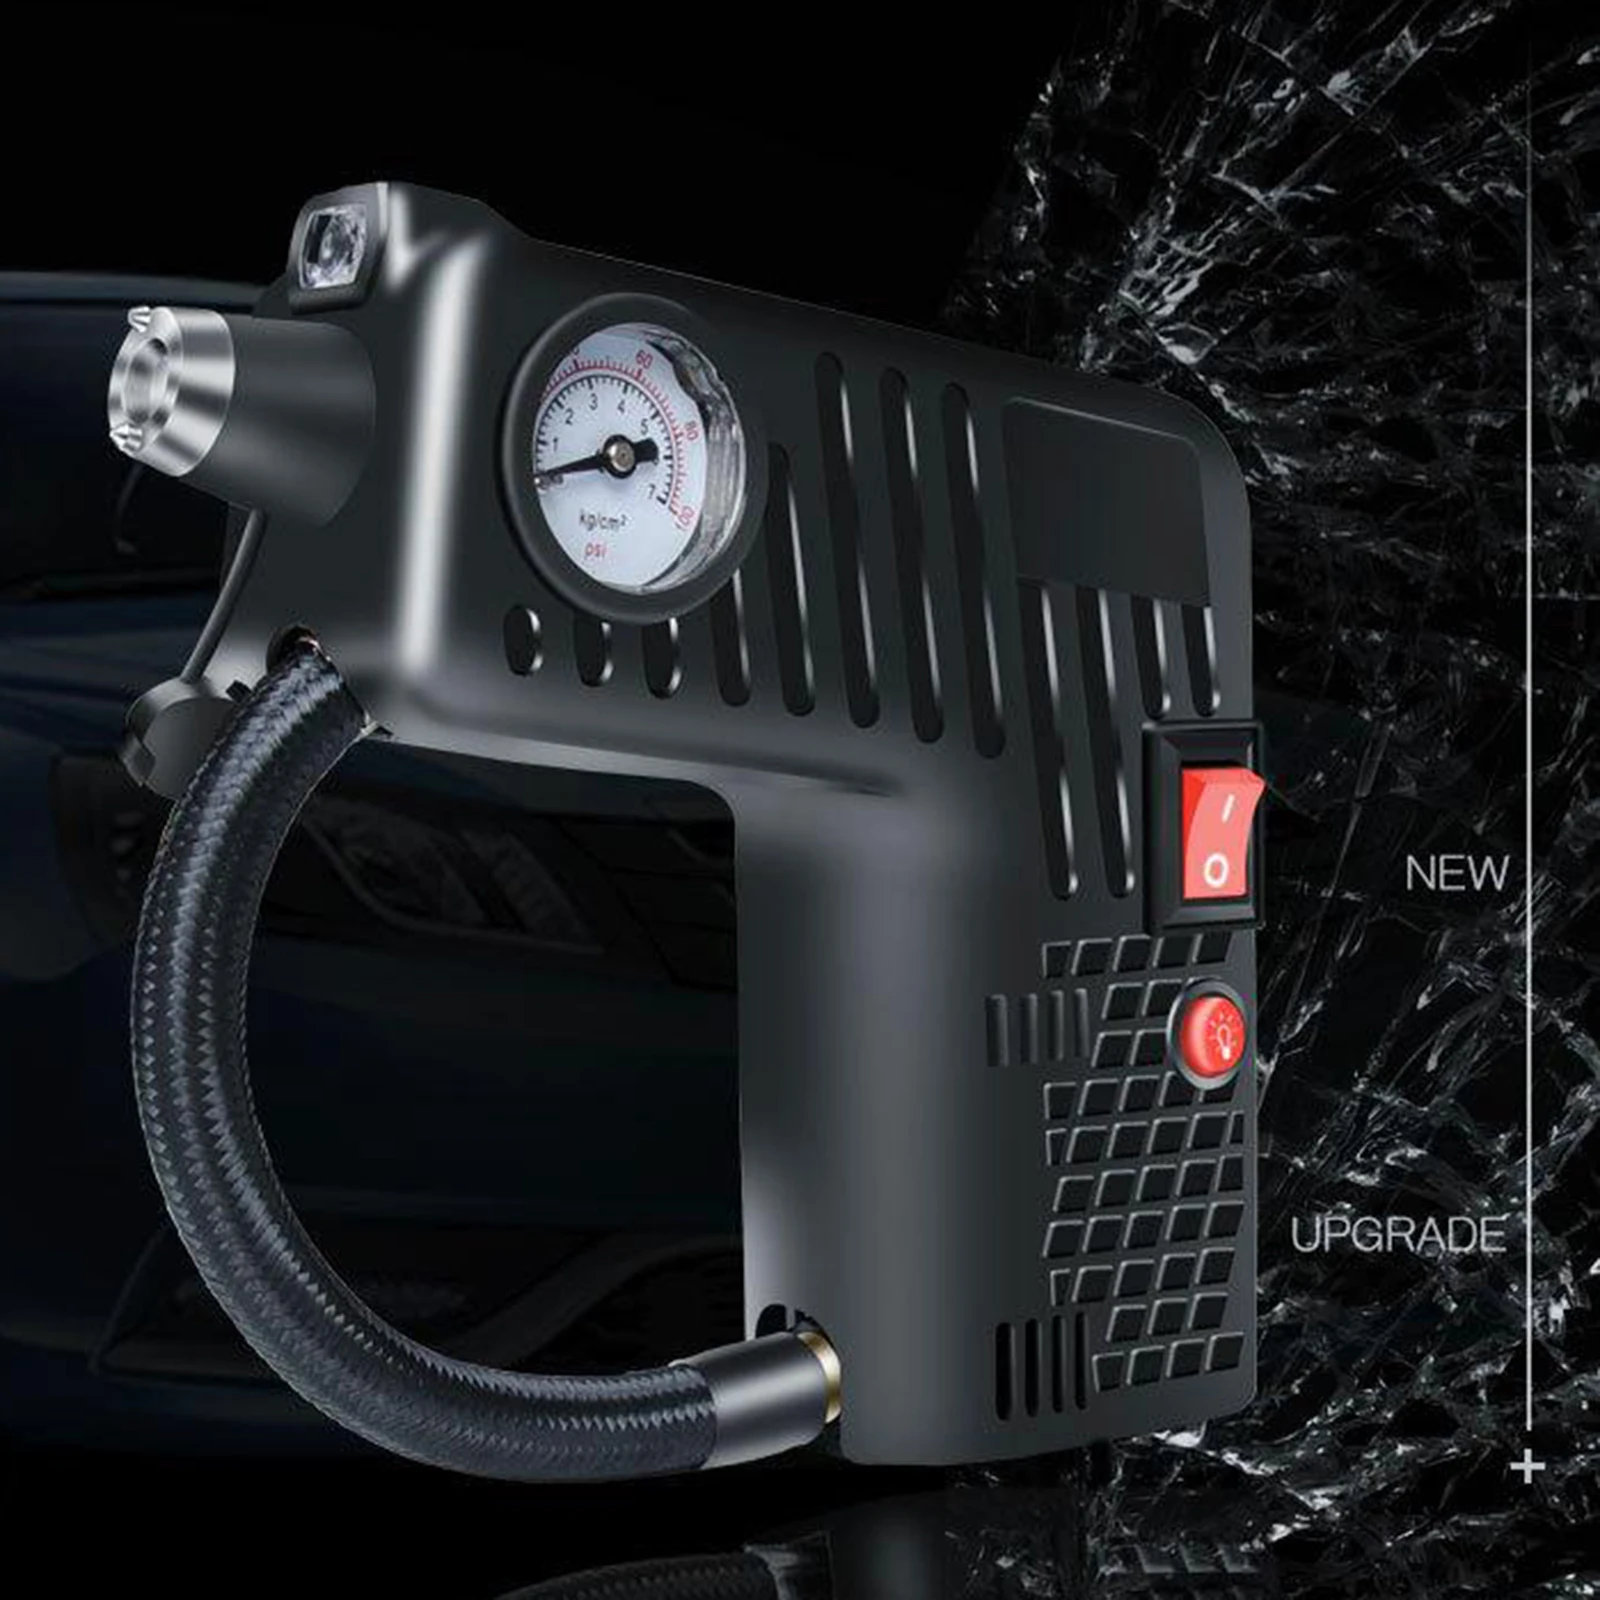 Portable Air Compressor Tire Inflator AC/DC Electric Pump ,with Pressure gauge, Air pump for Car Tires, Motorcycle, Bike